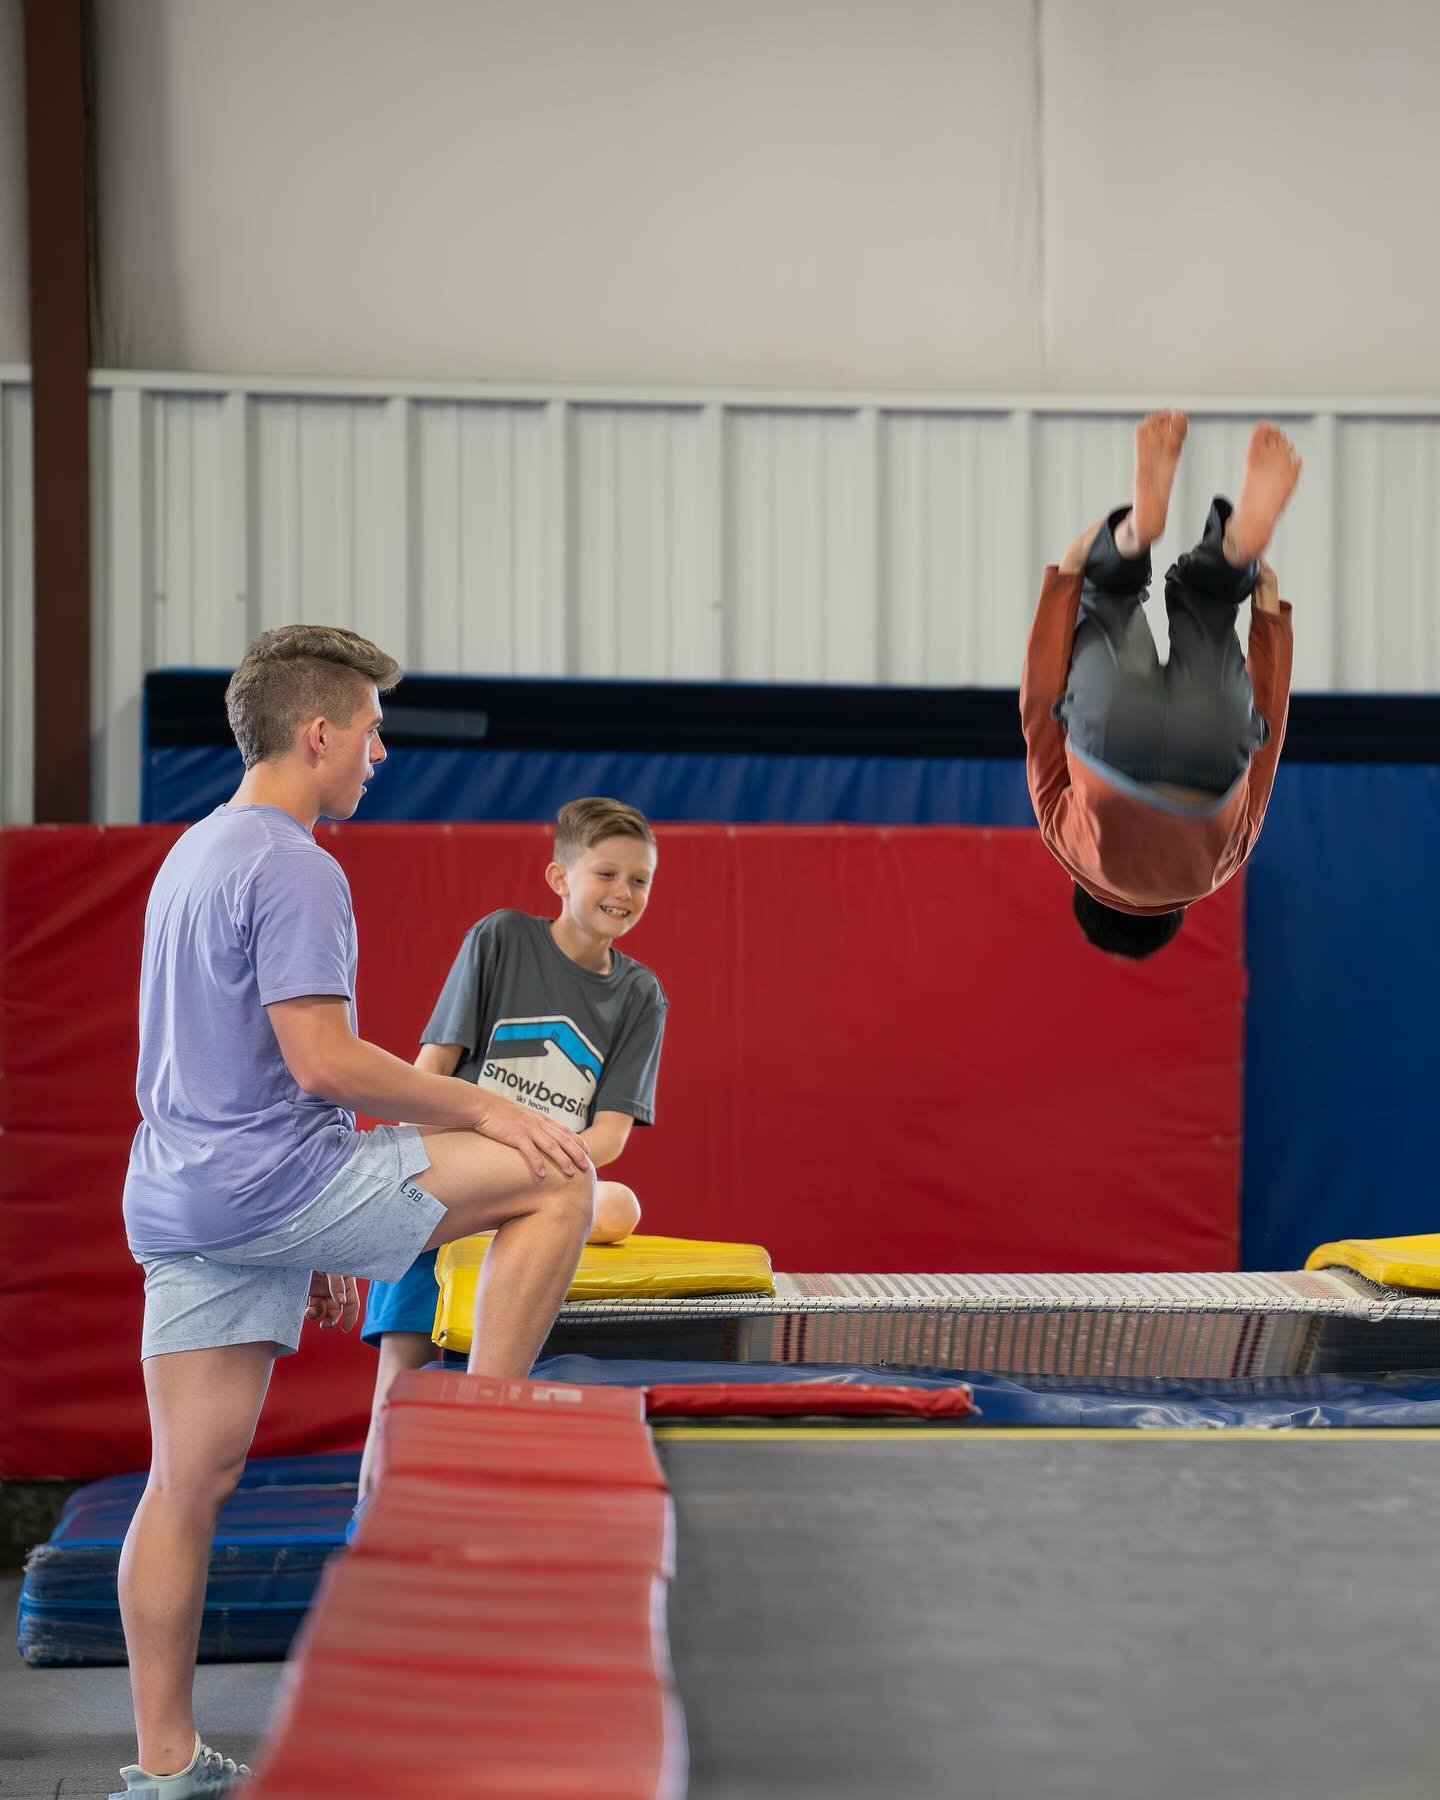 We have loved the support from Northern Star Bounders to come train at their facility. This has been an awesome program to learn flips and spins. @northernstarbounders